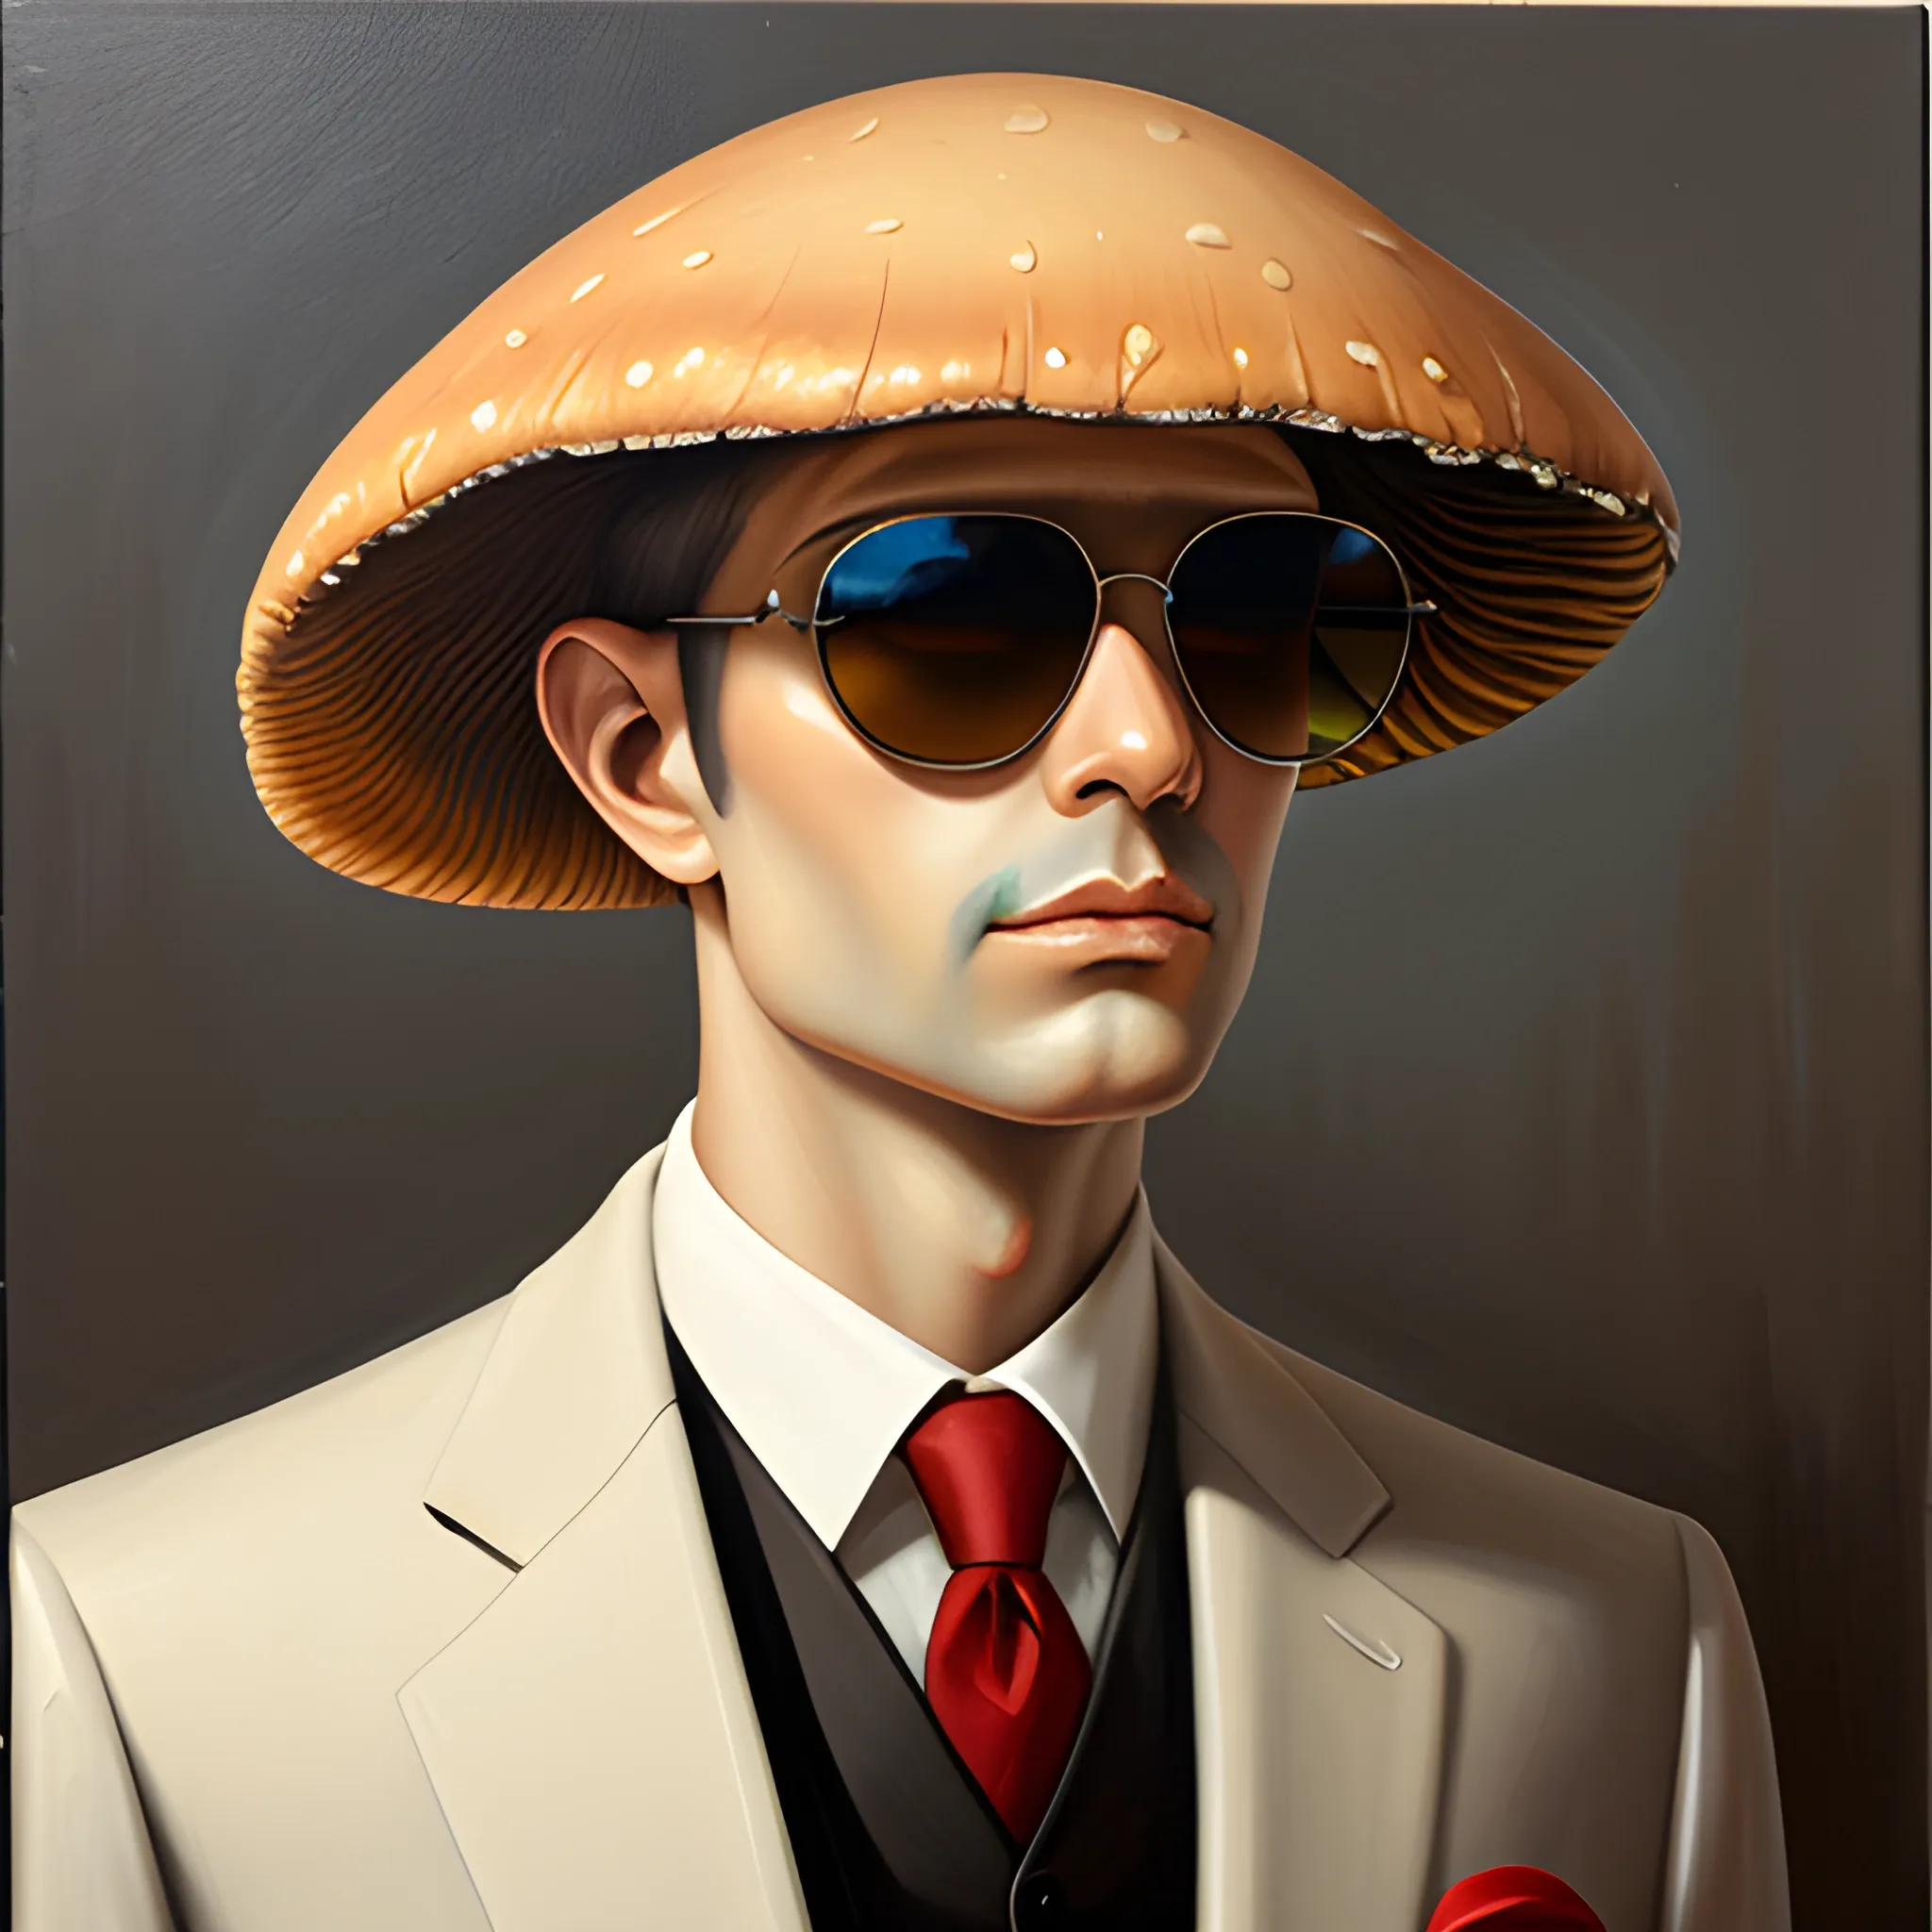 , oil painting, mushroom with human face, sunglasses, formal suit